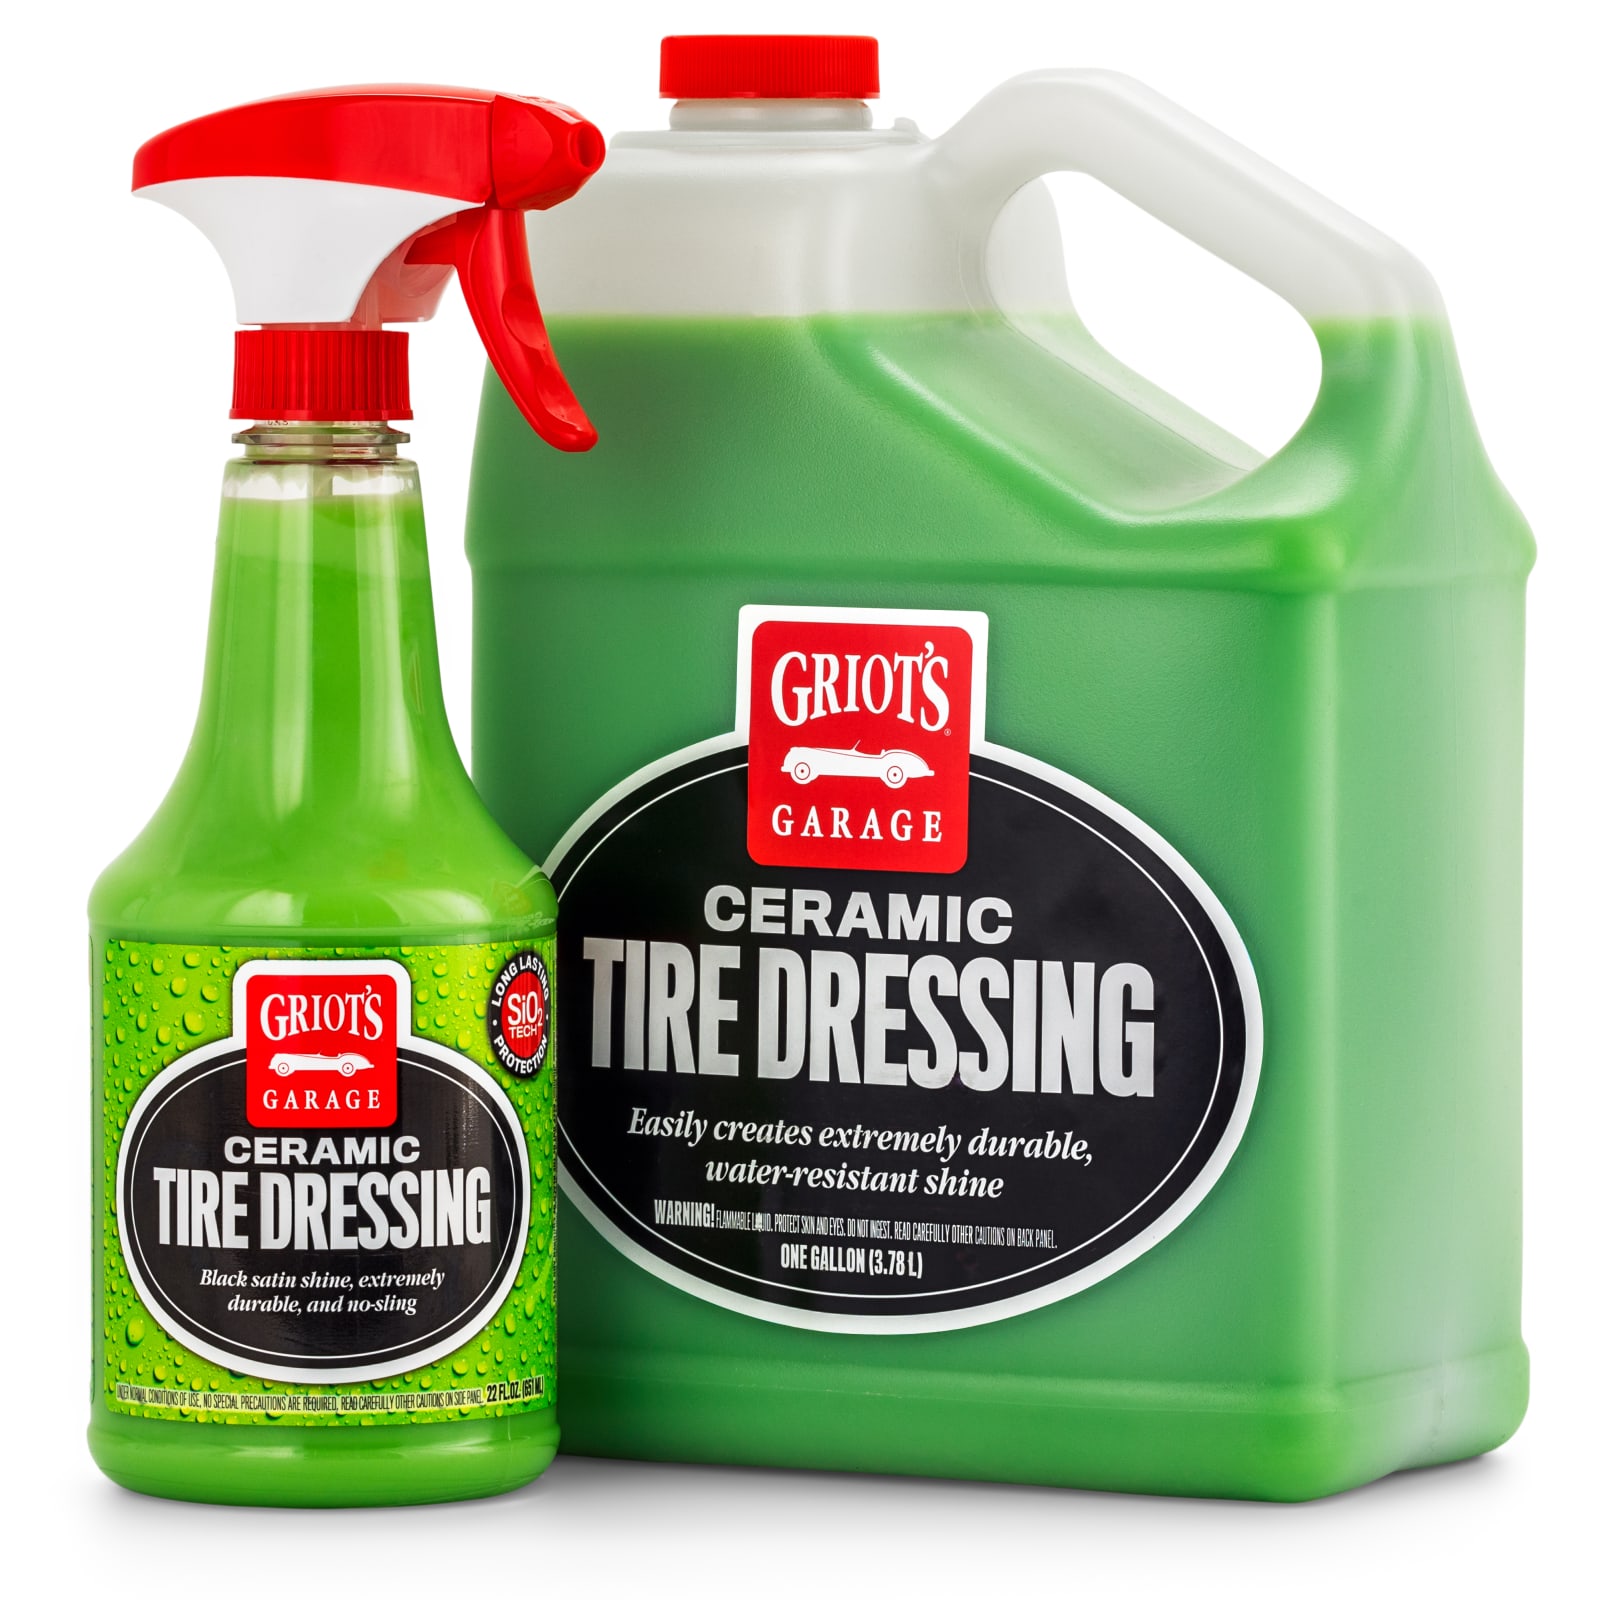 Show Car Product's Ultra Blue Tire Dressing